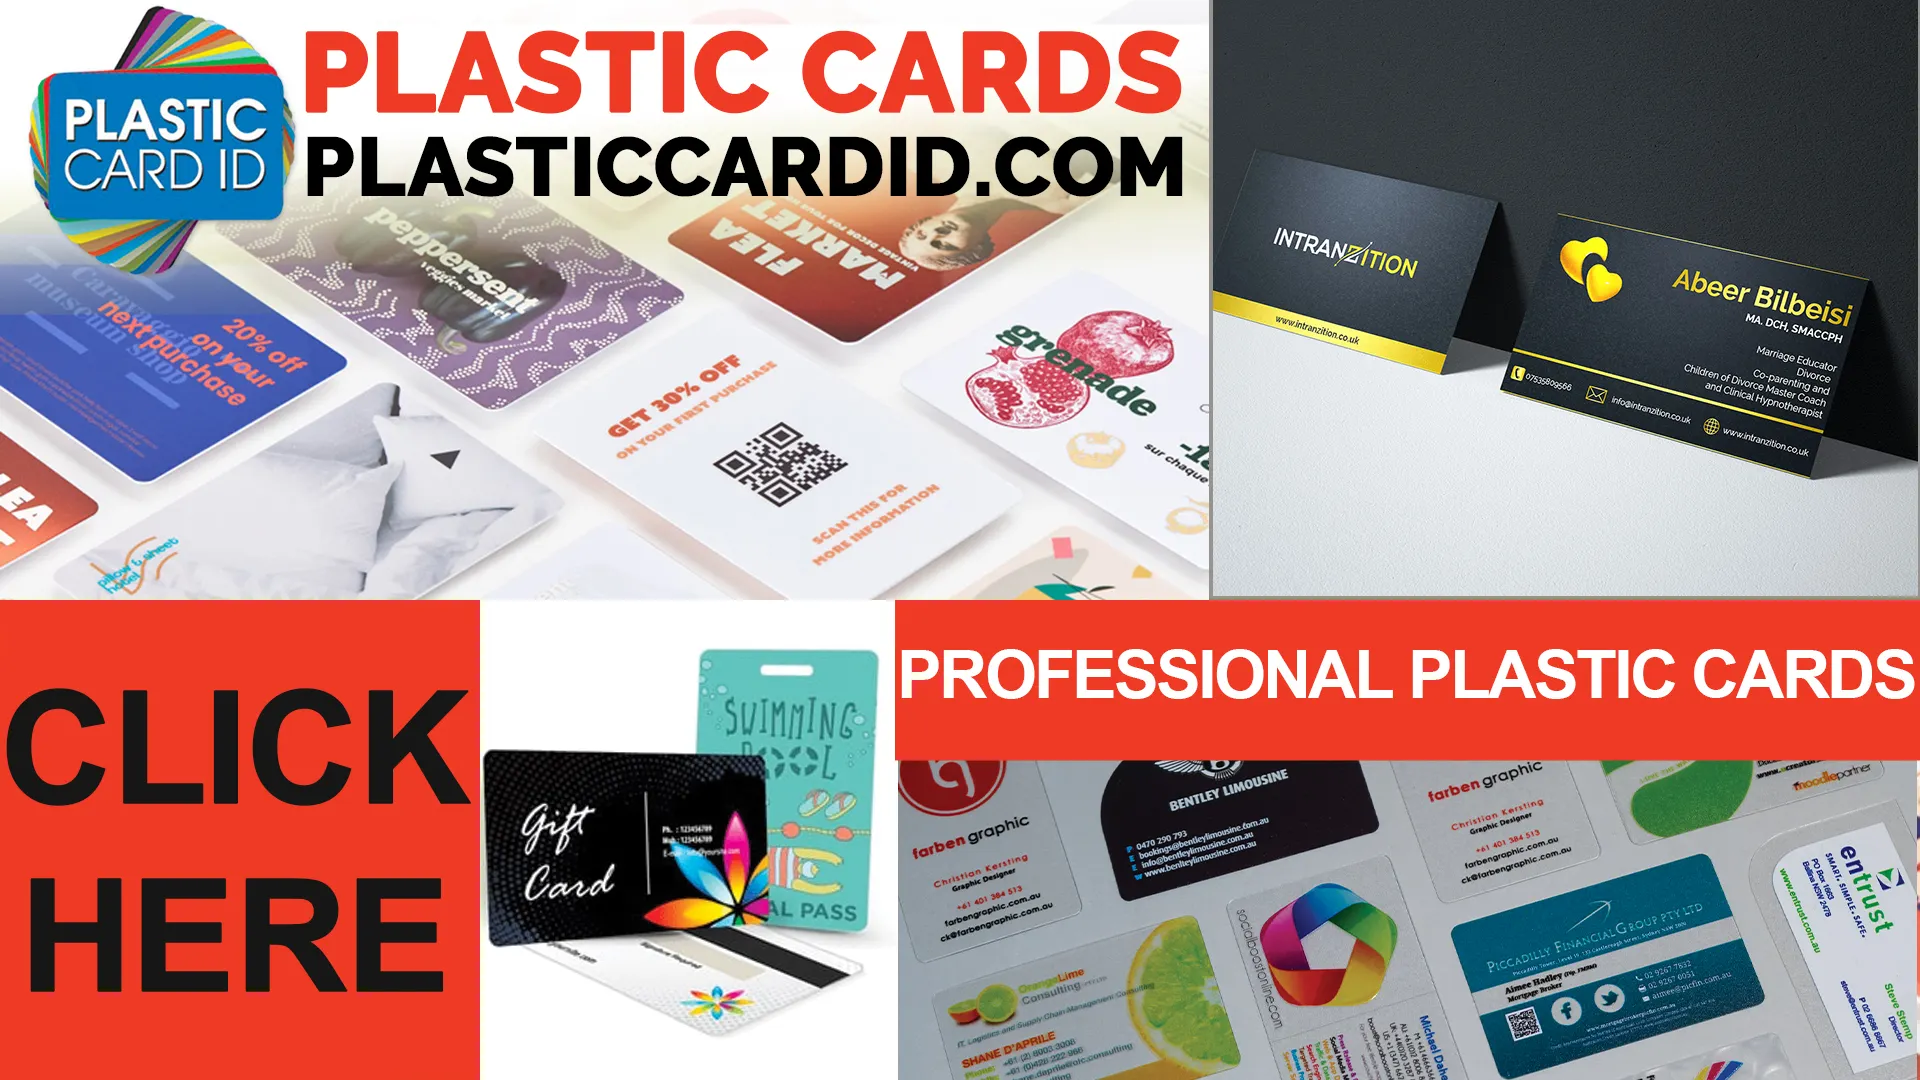 Leading the Charge in Eco-Friendly Plastic Card Printing